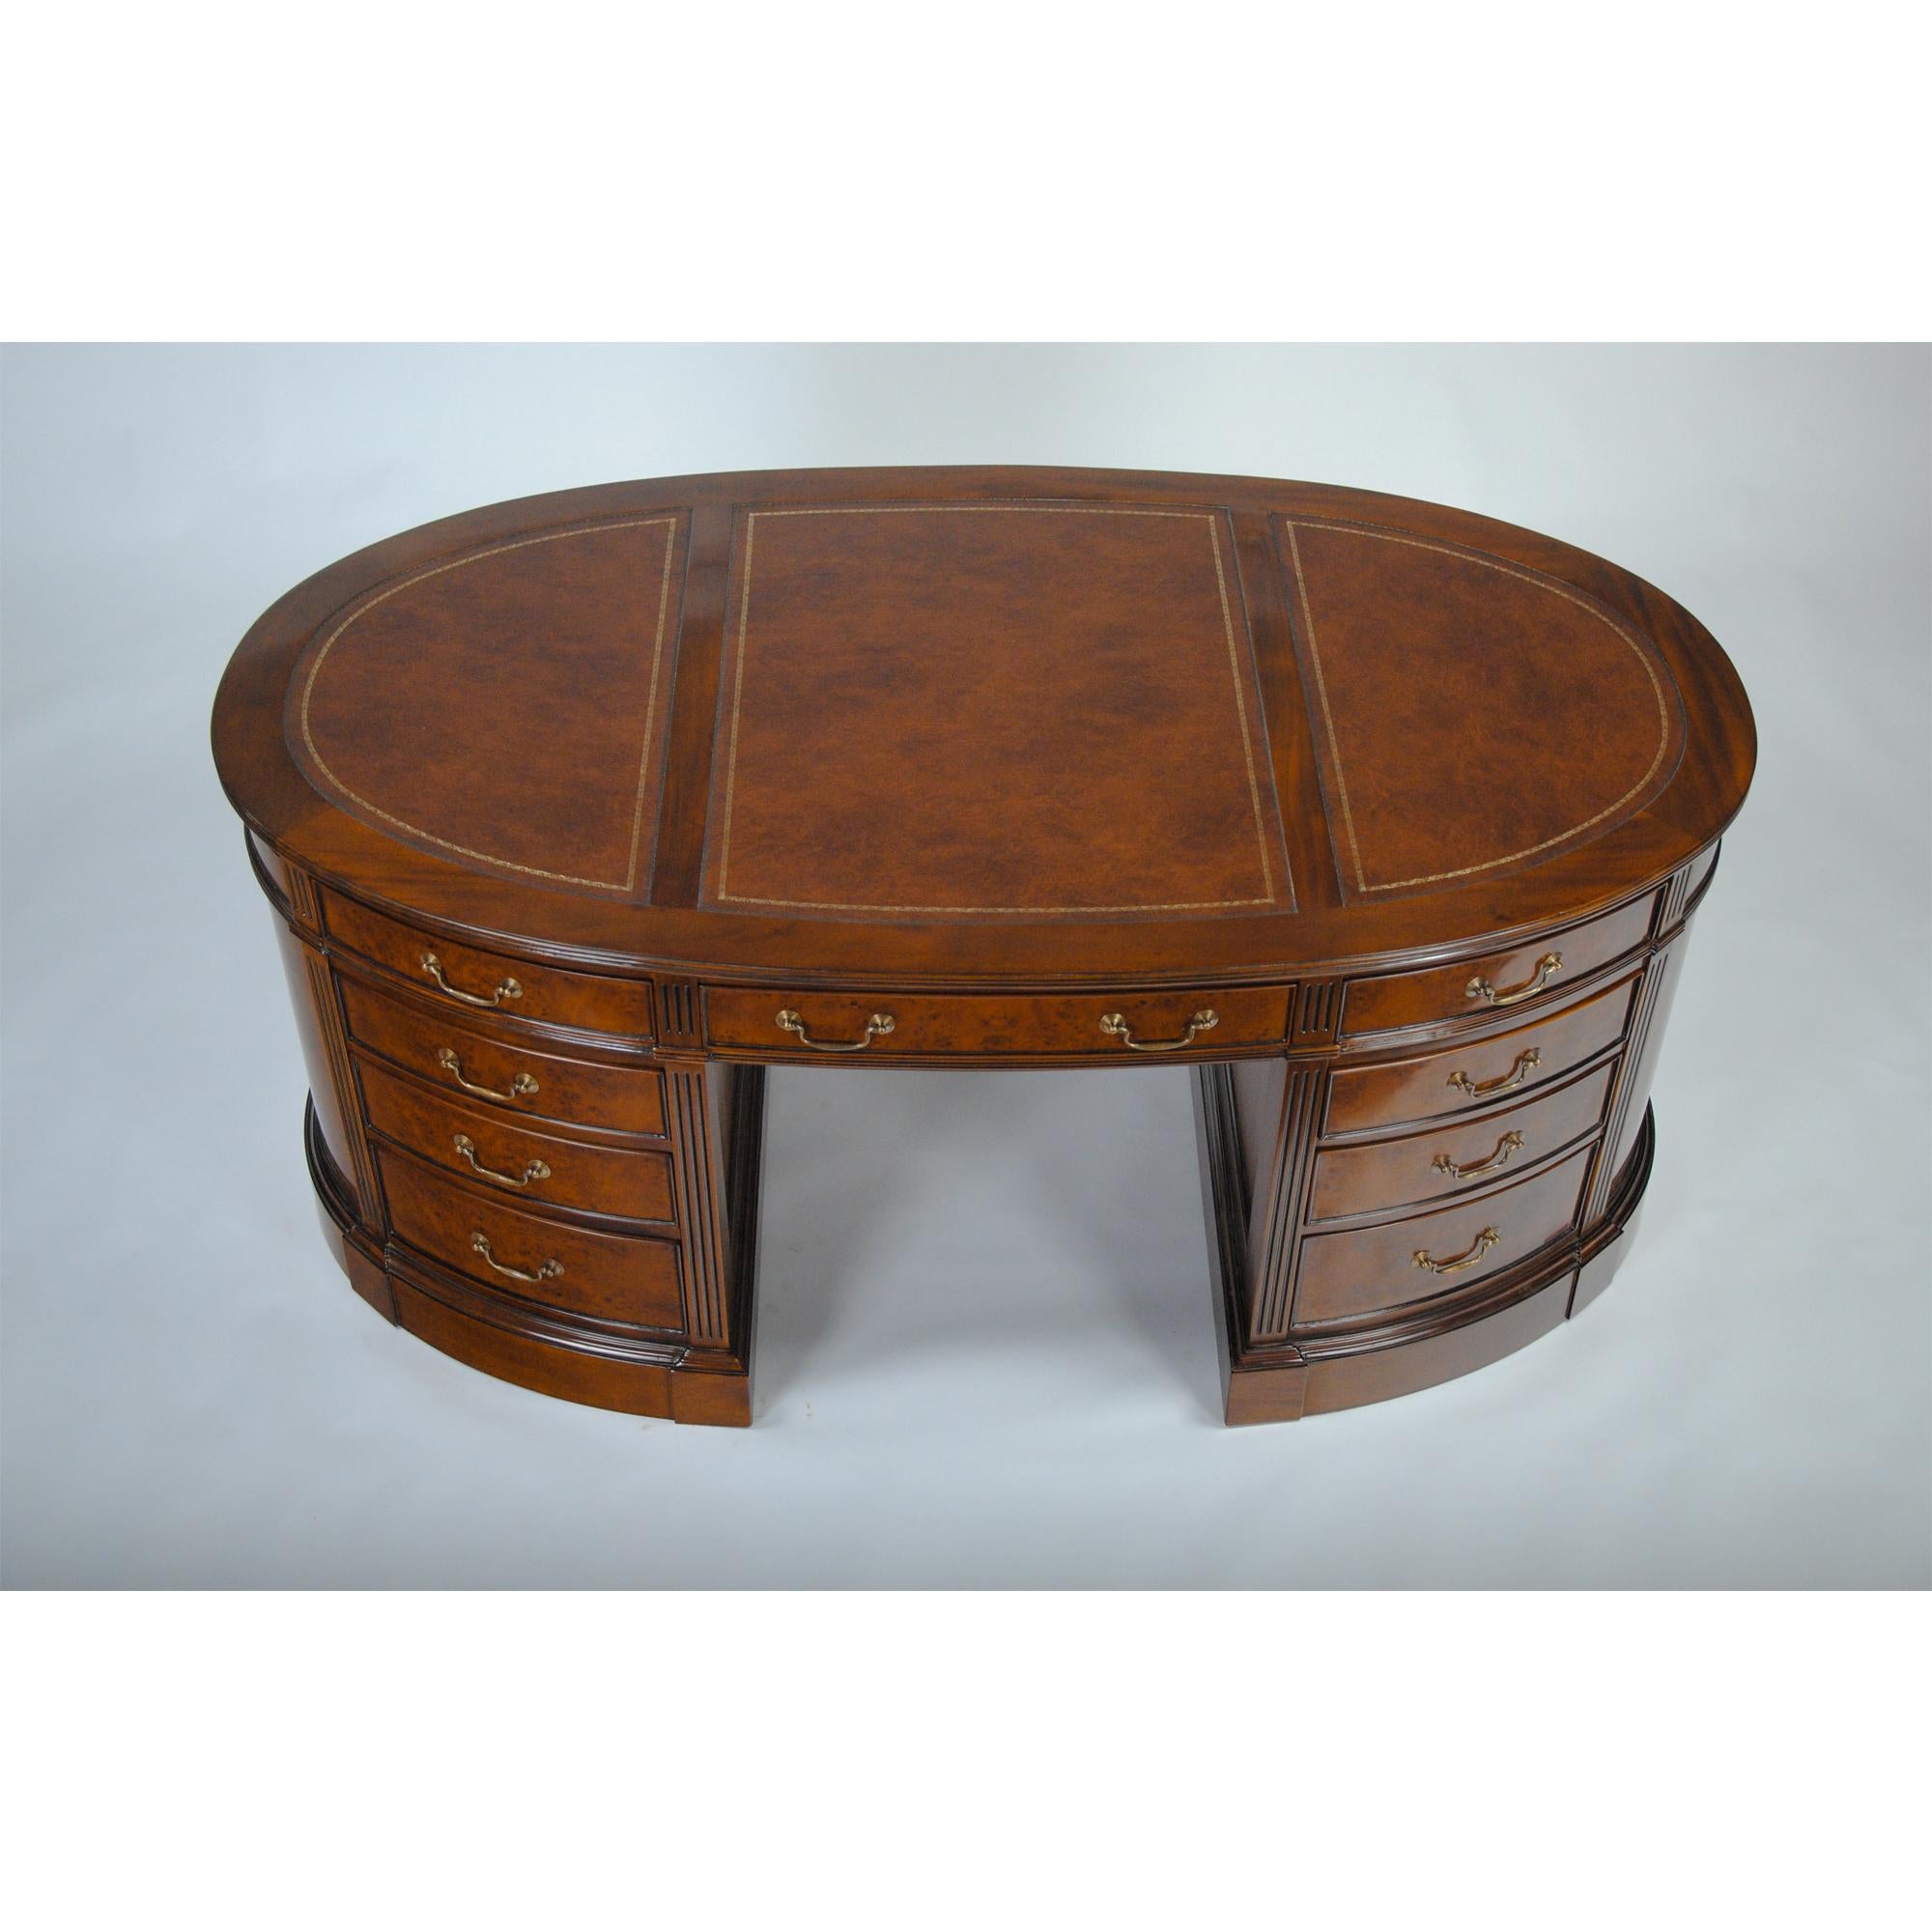 Burled Oval Partners Desk In New Condition For Sale In Annville, PA